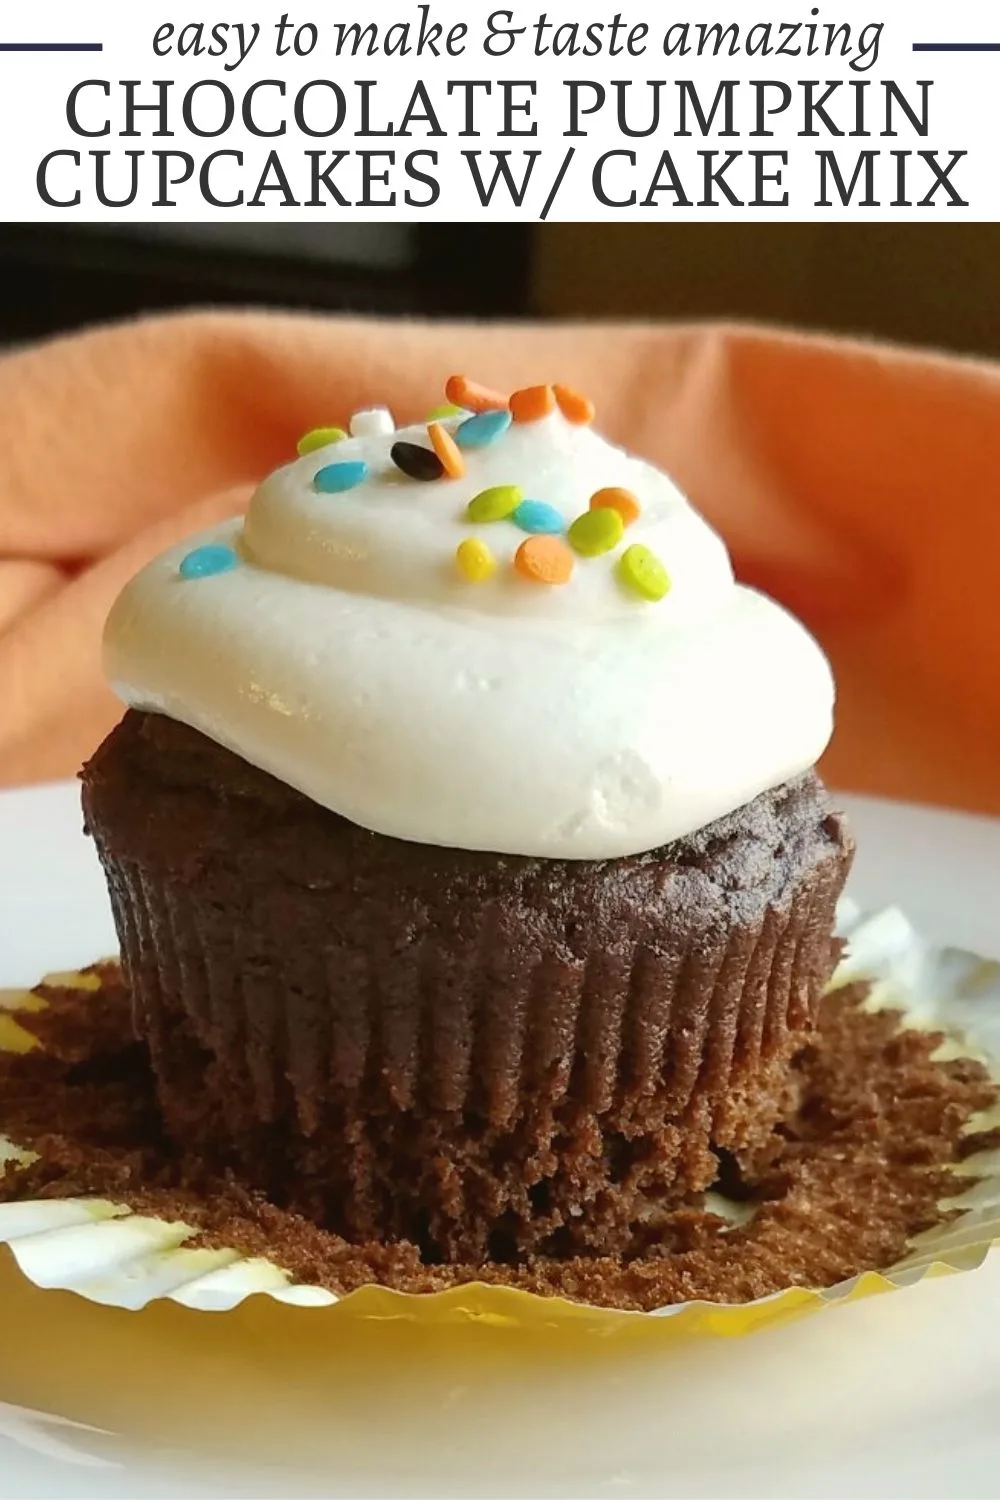 Chocolate pumpkin cupcakes are easy to make with the help of a cake mix. They are the perfect mix of pumpkin spice and rich chocolate cake. The best part is they only take a handful of ingredients to make and they taste delicious.